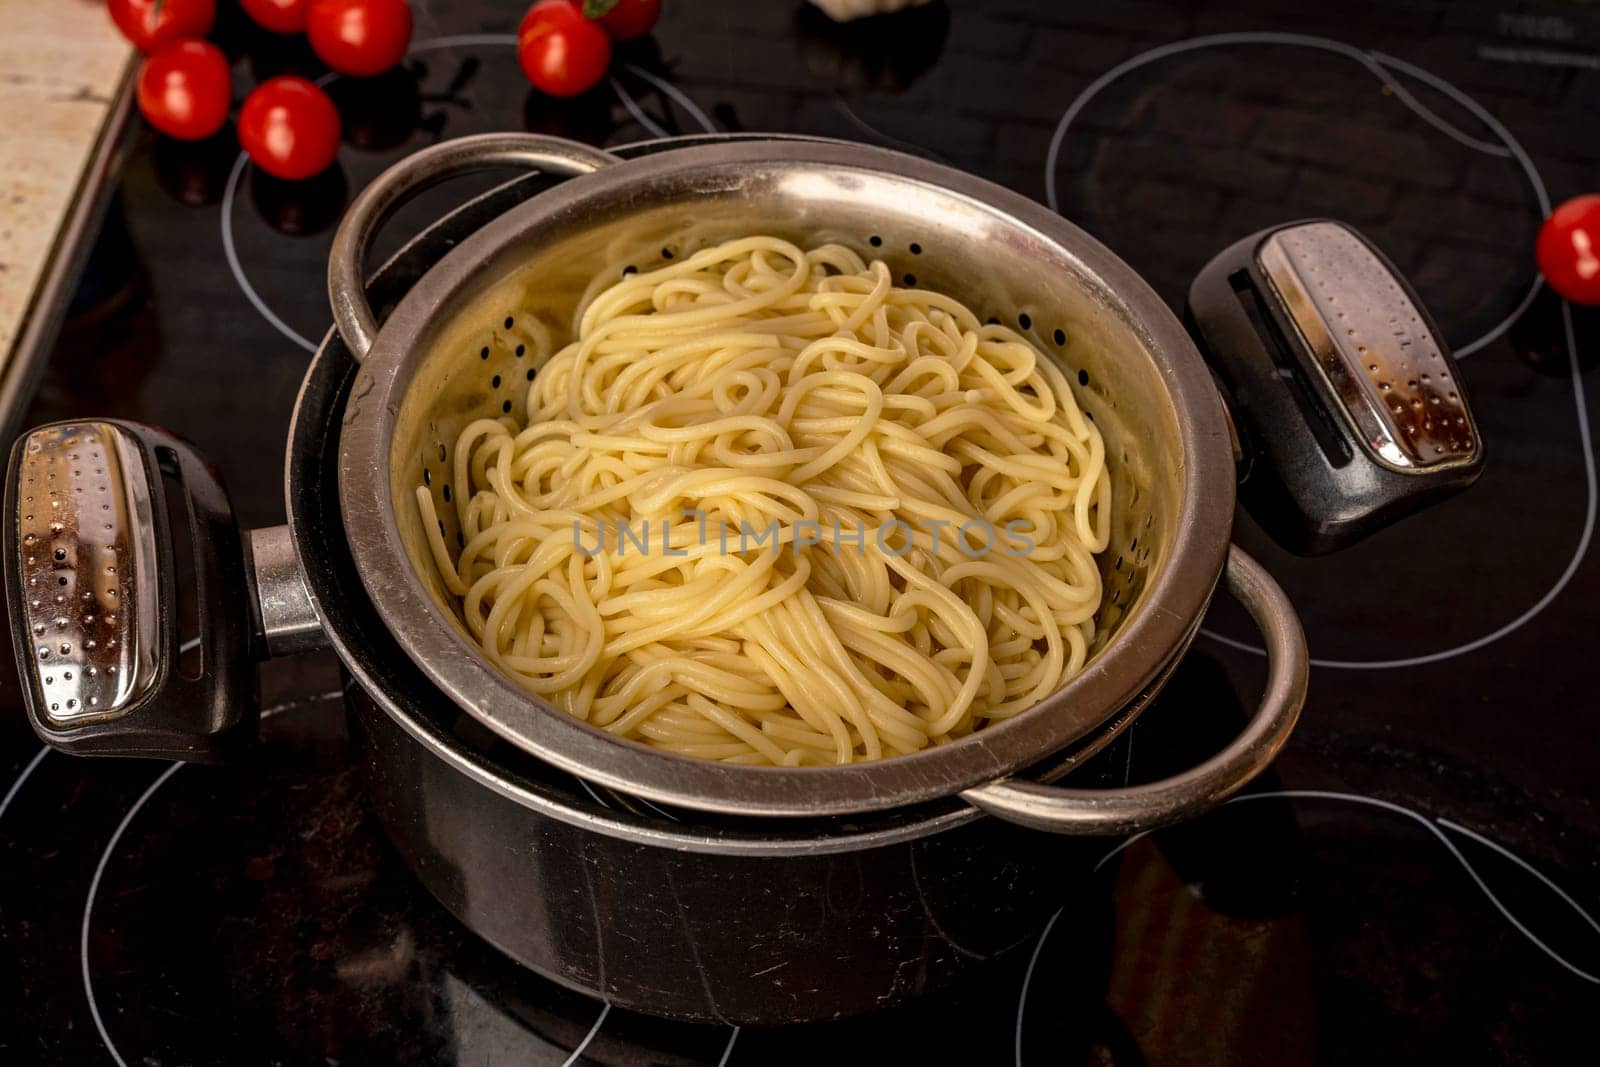 we cook ourselves. cooked ready-made spaghetti on the stove. boiled ready-made spaghetti toss in a colander. pot with spaghetti . cooking spaghetti. homemade Italian-style dinner. Pasta cooking